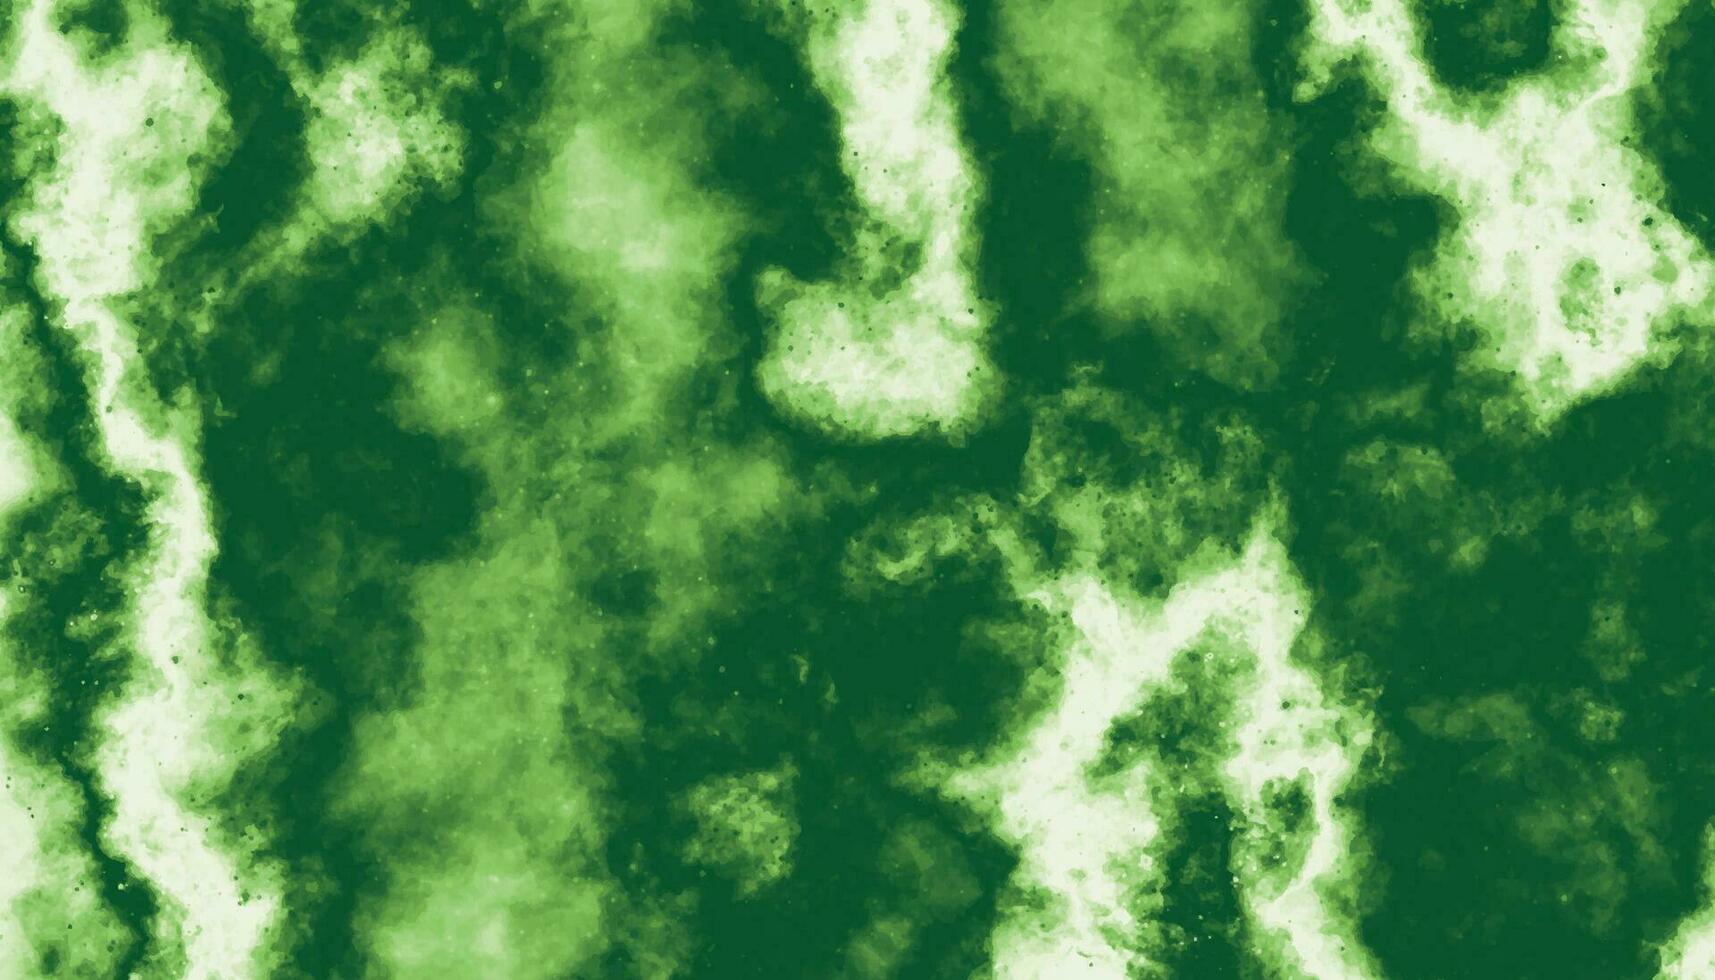 Green Grunge Texture. Green and White Watercolor Background. Colorful Painting Background Texture. Background with Green Texture and Distressed Vintage Grunge vector